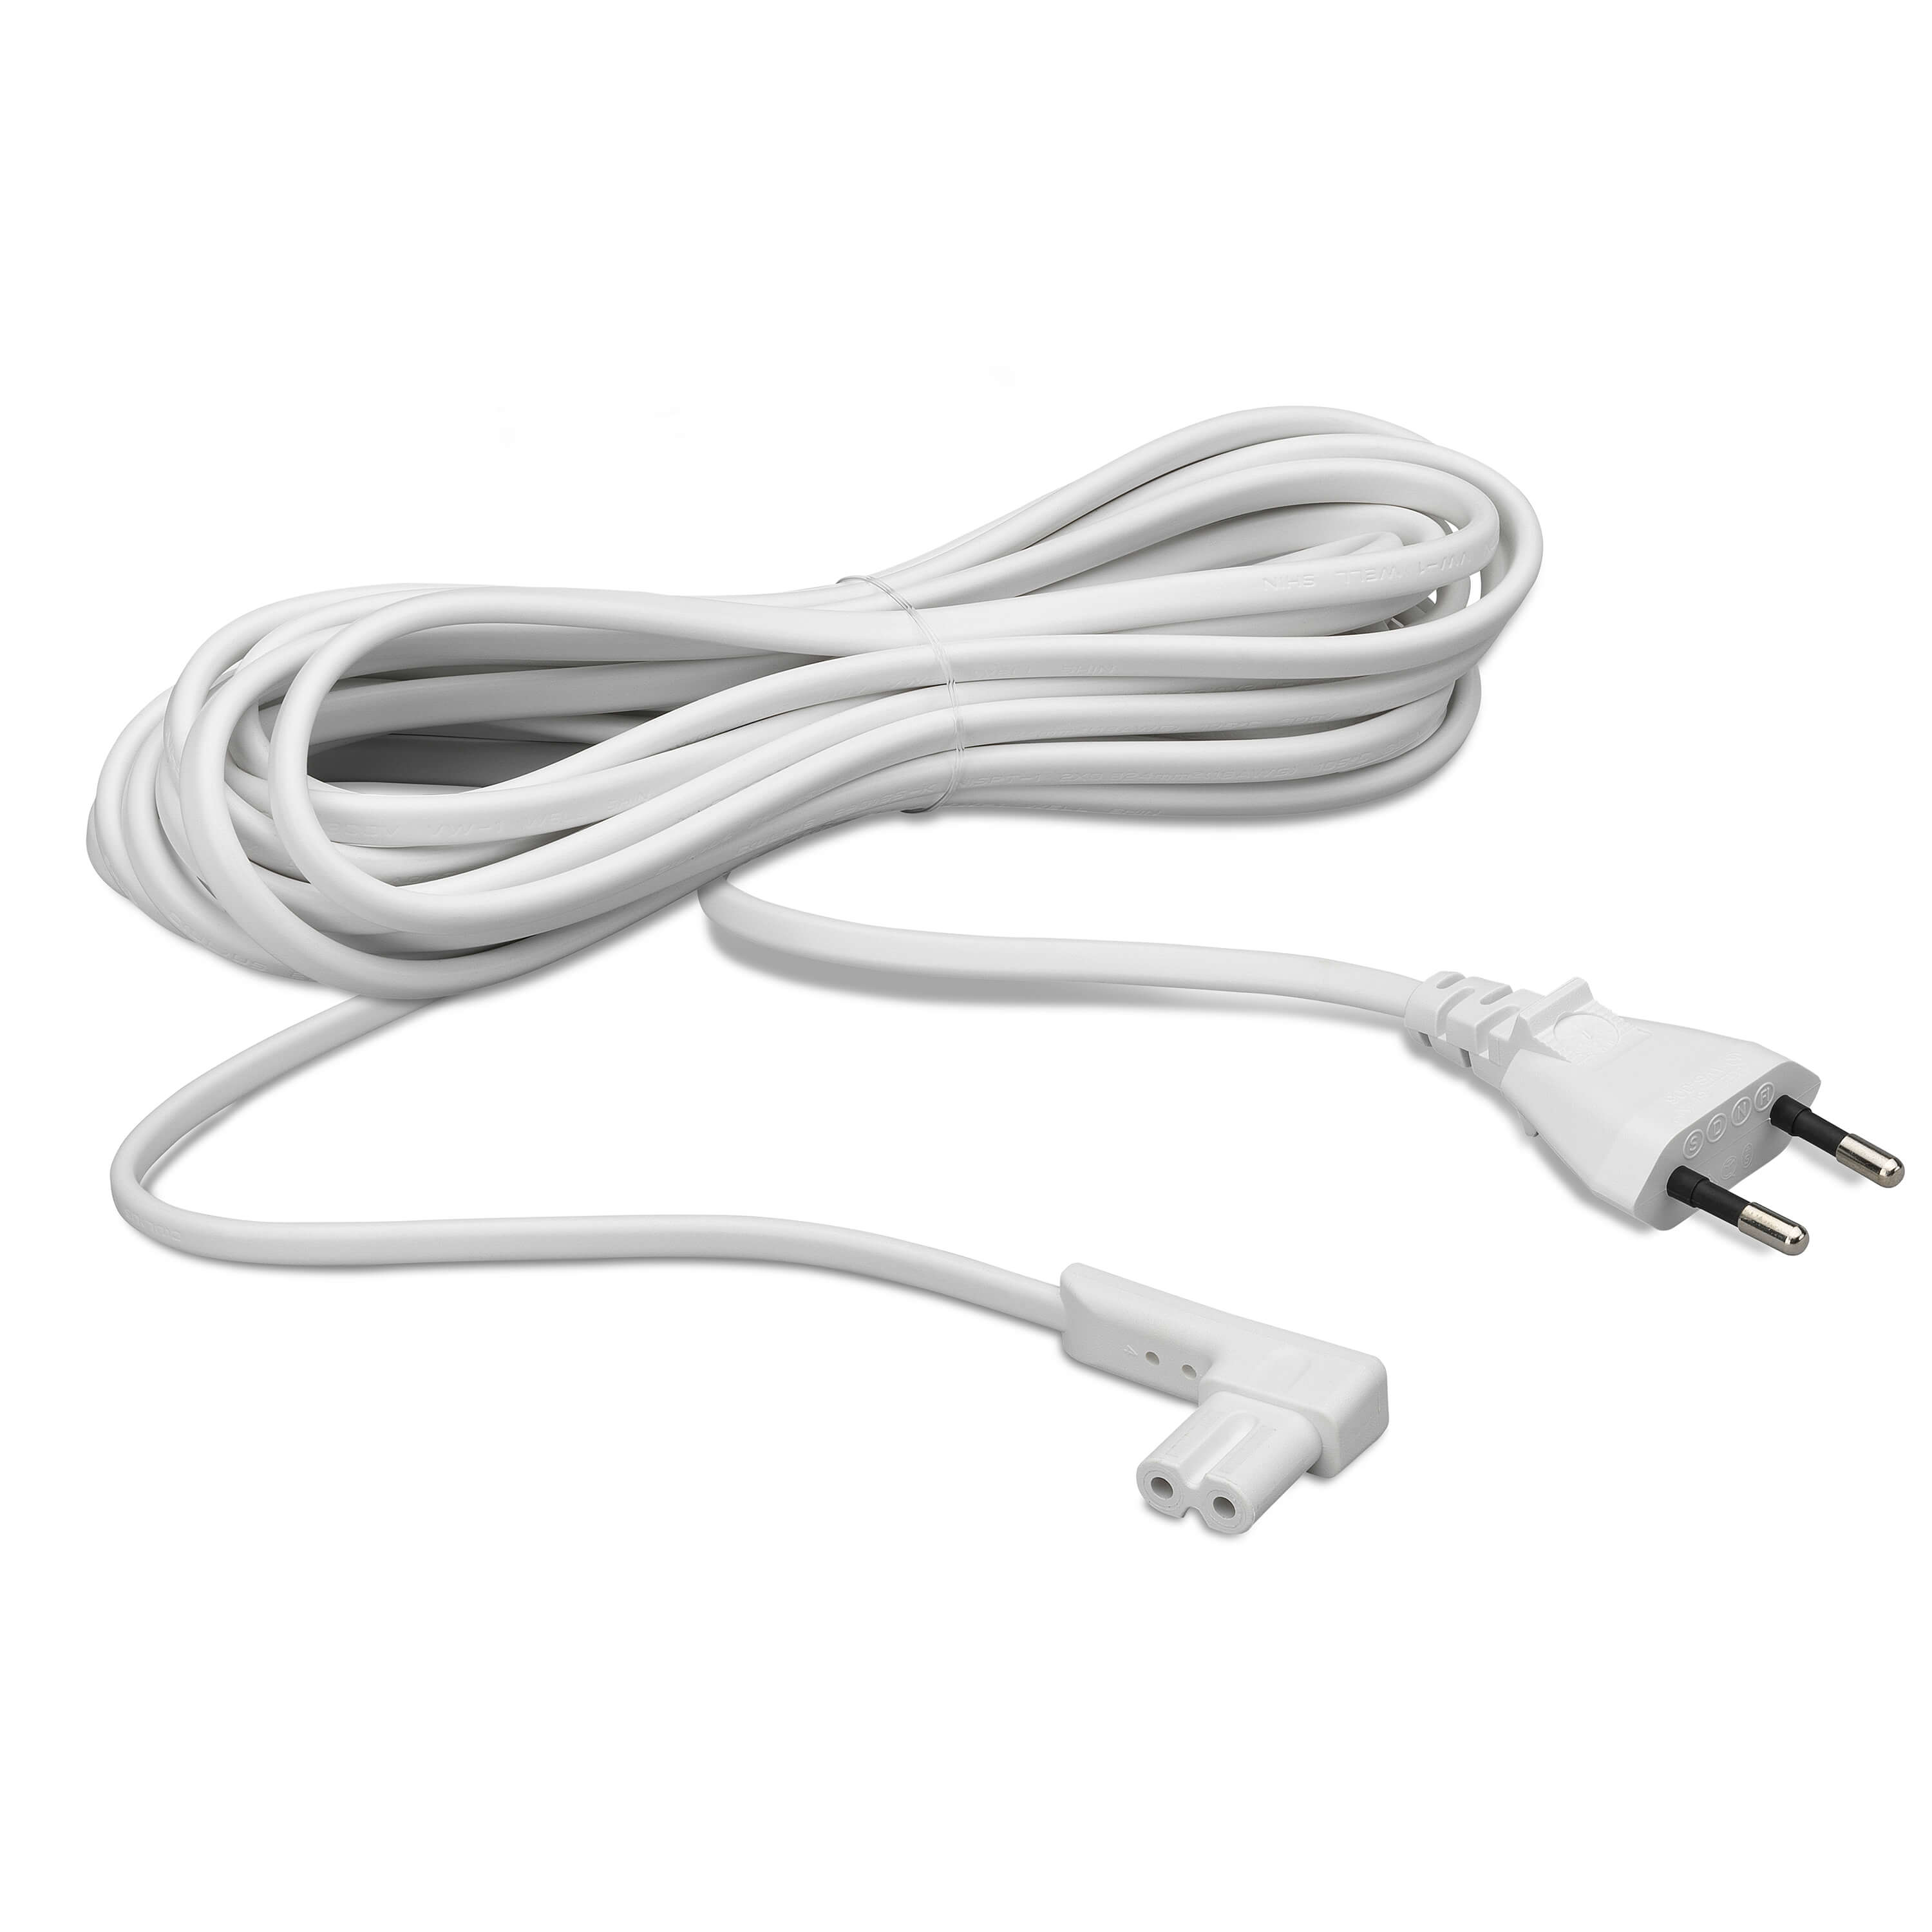 trofast Sygdom by FLEXSON 5M Power Cable for Sonos One/Play:1 EU - White Single